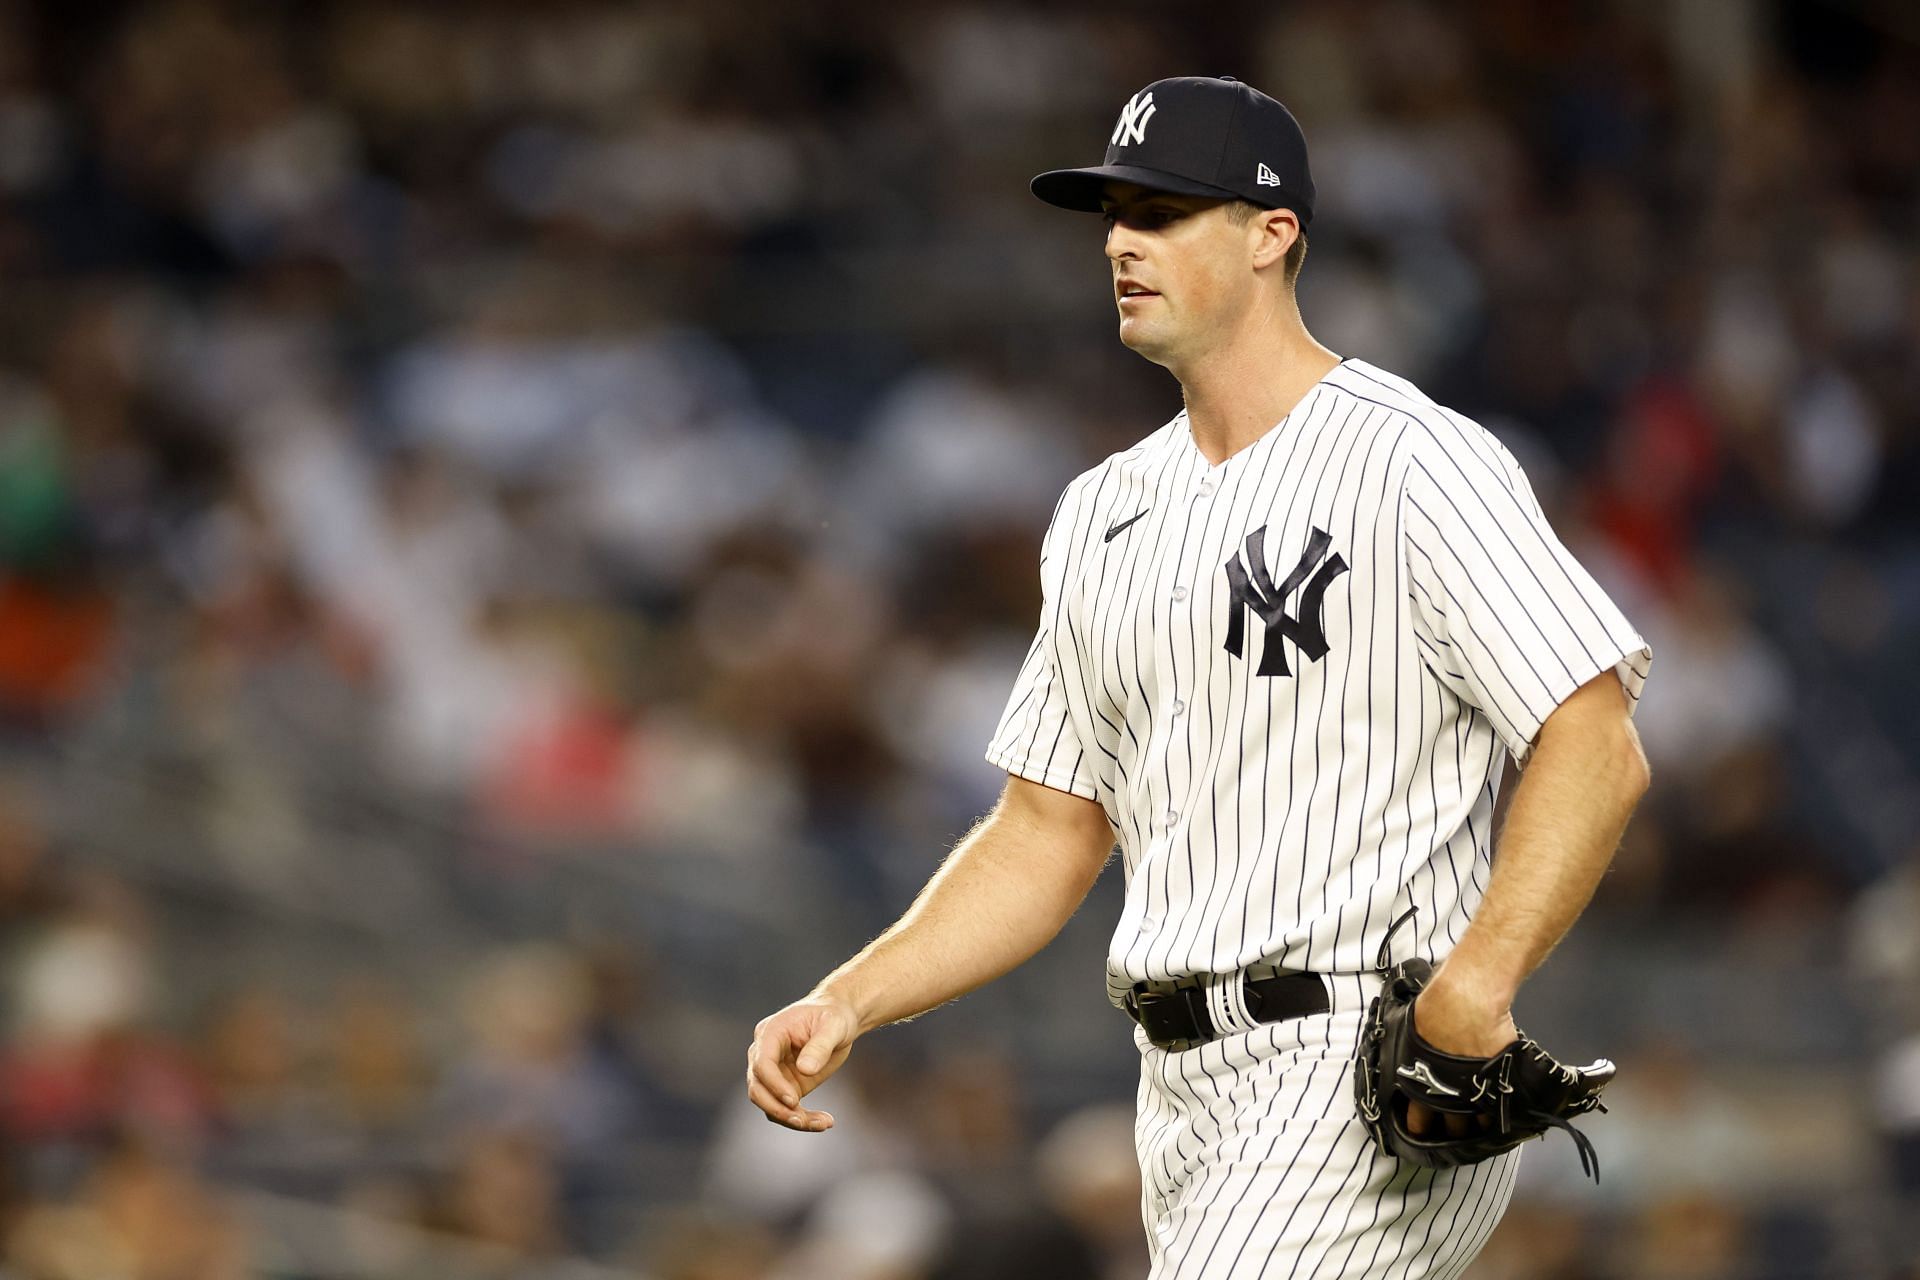 Clay Holmes-led bullpen keeping Yankees afloat